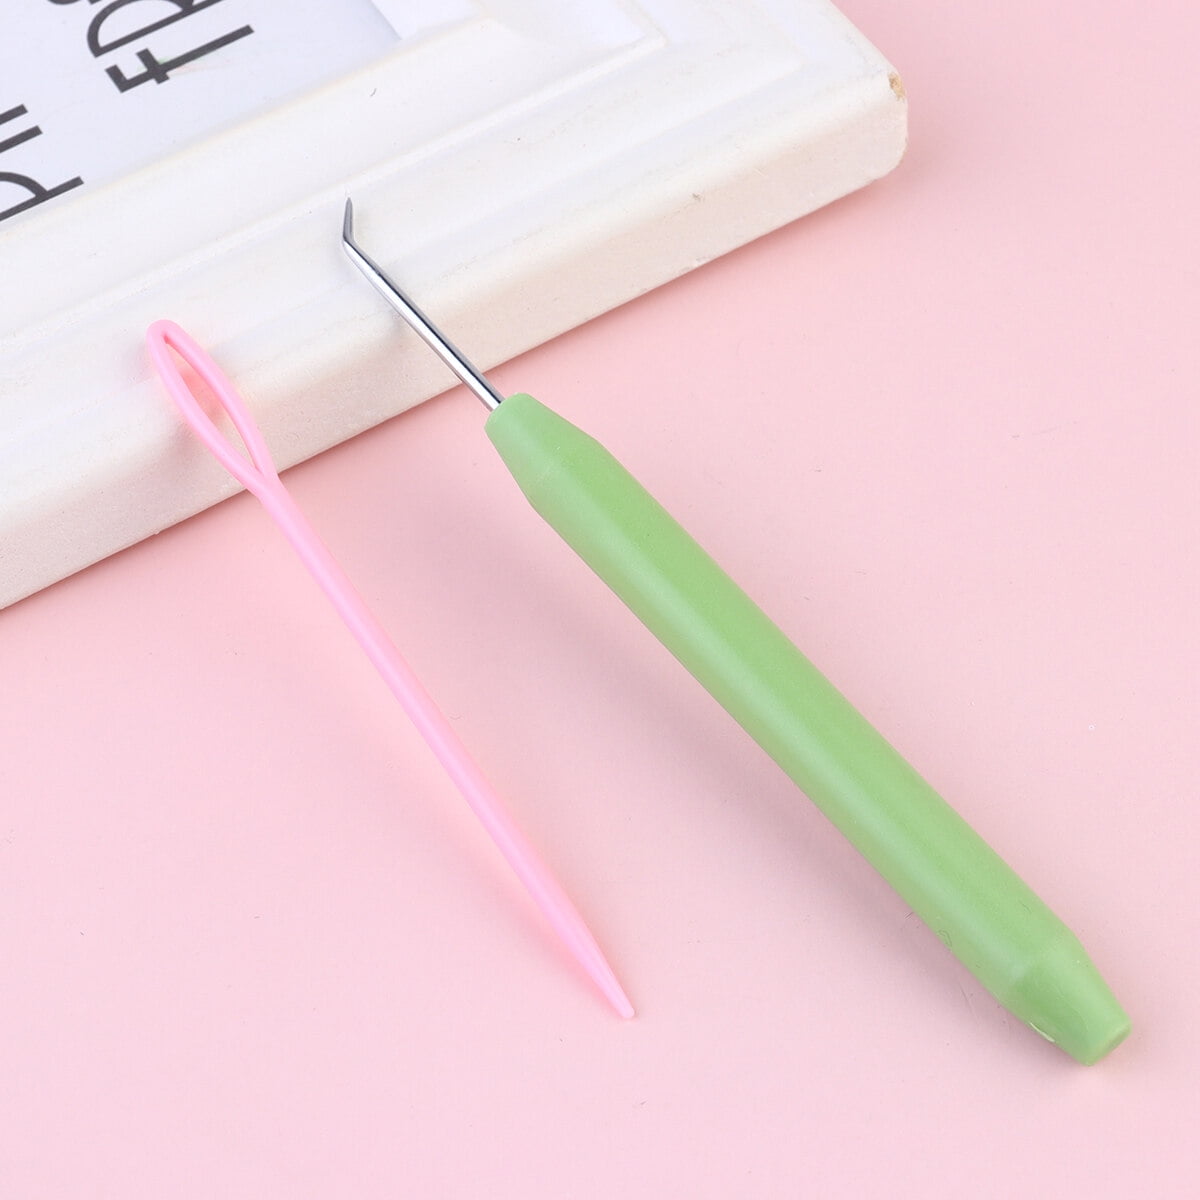 Amour Crochet Hook Set - Pastel From Clover - Knitting and